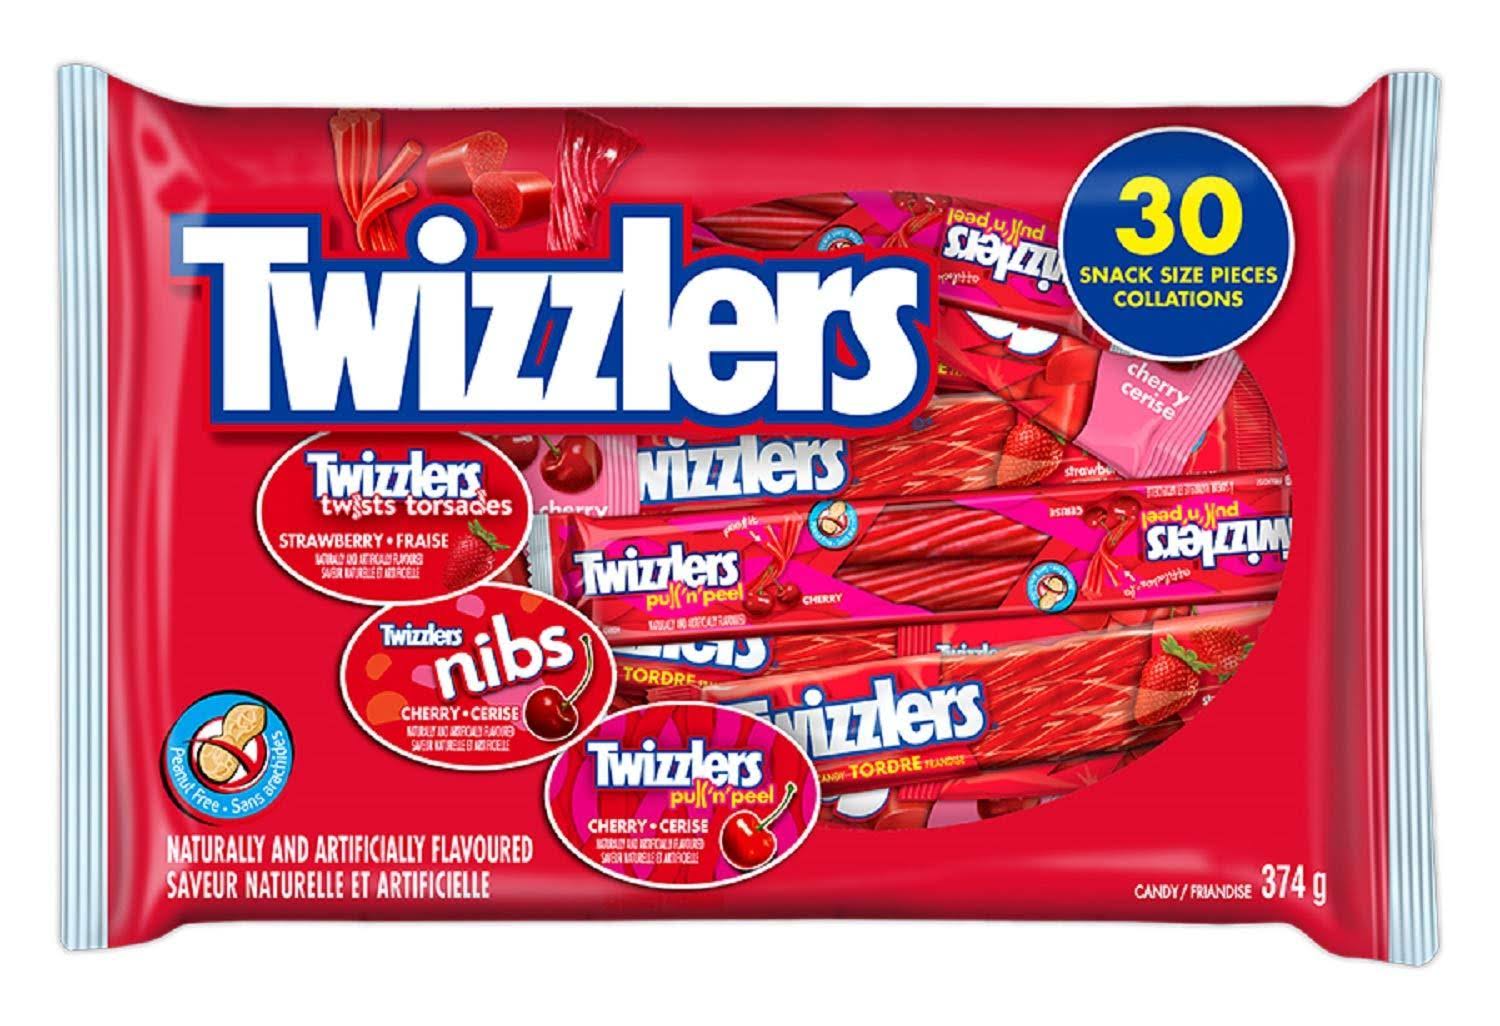 Twizzlers Snack Size Pack